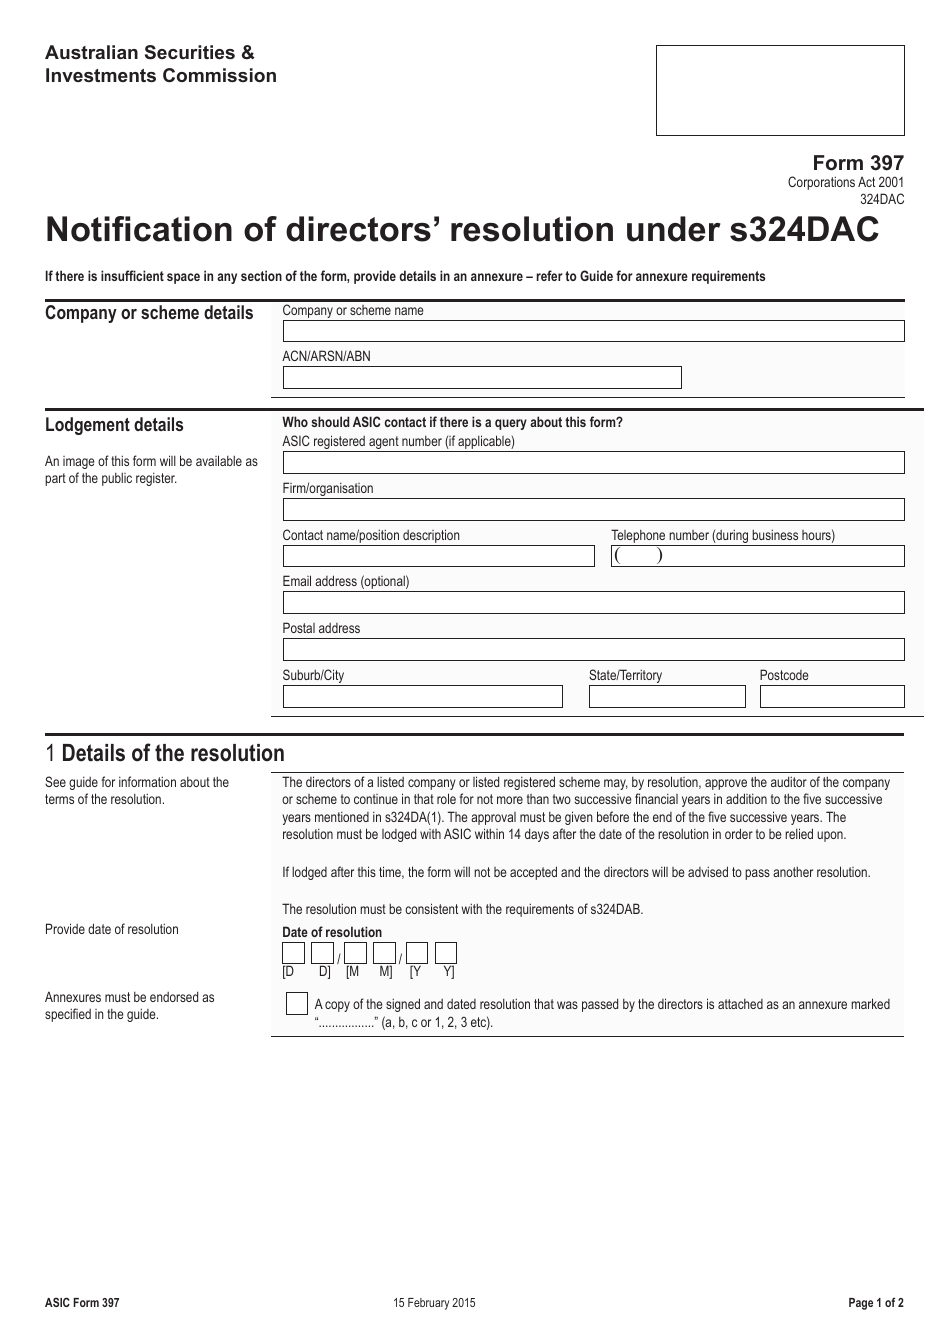 Form 397 Notification of Directors Resolution Under S324dac - Australia, Page 1